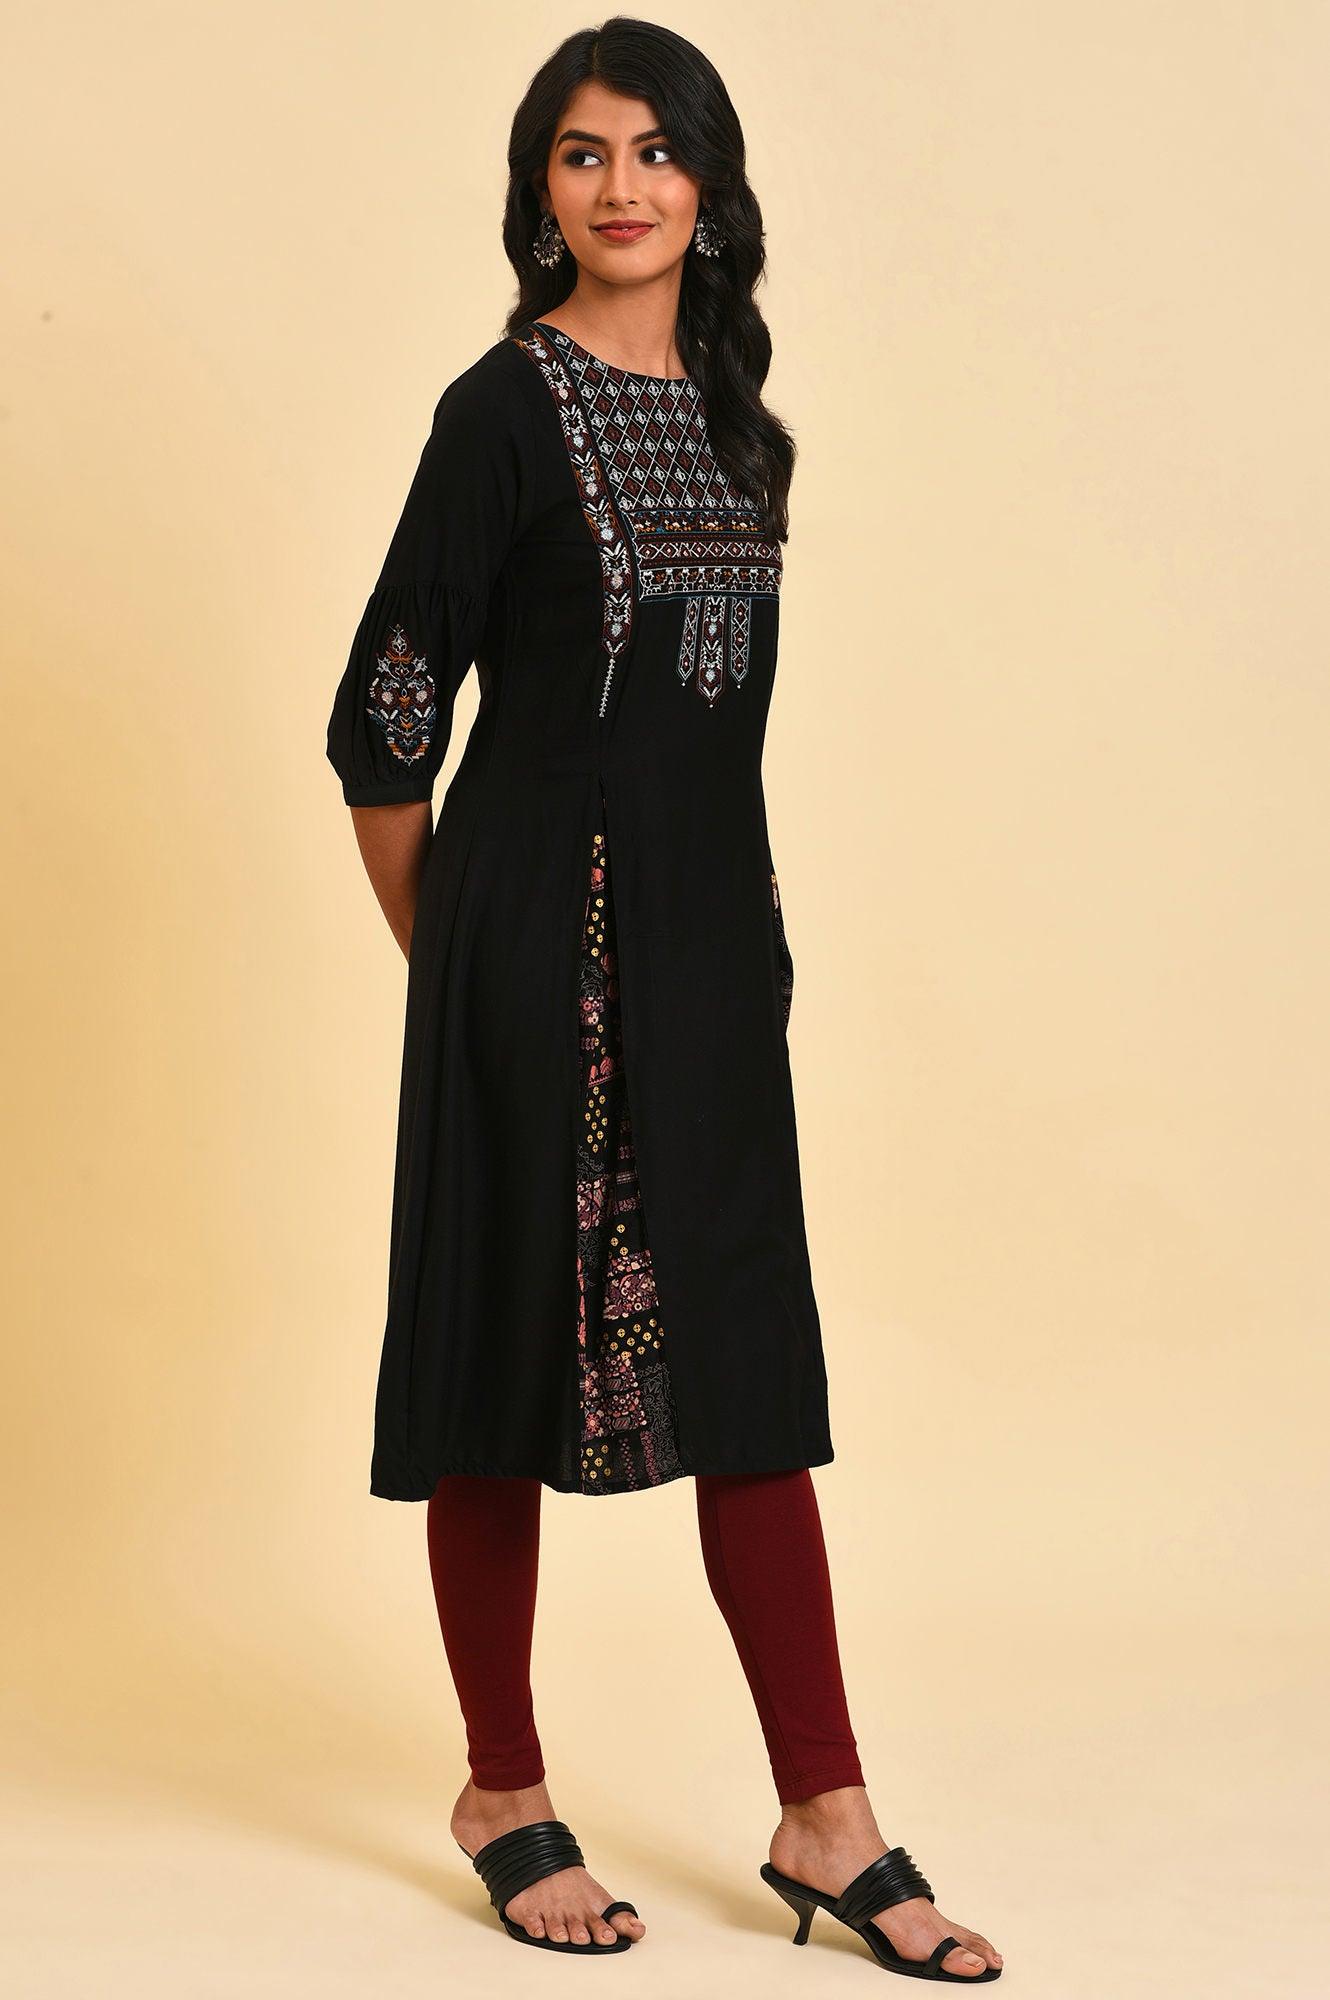 Black Godget Plus Size Tunic with Multi-coloured Embroidery - wforwoman